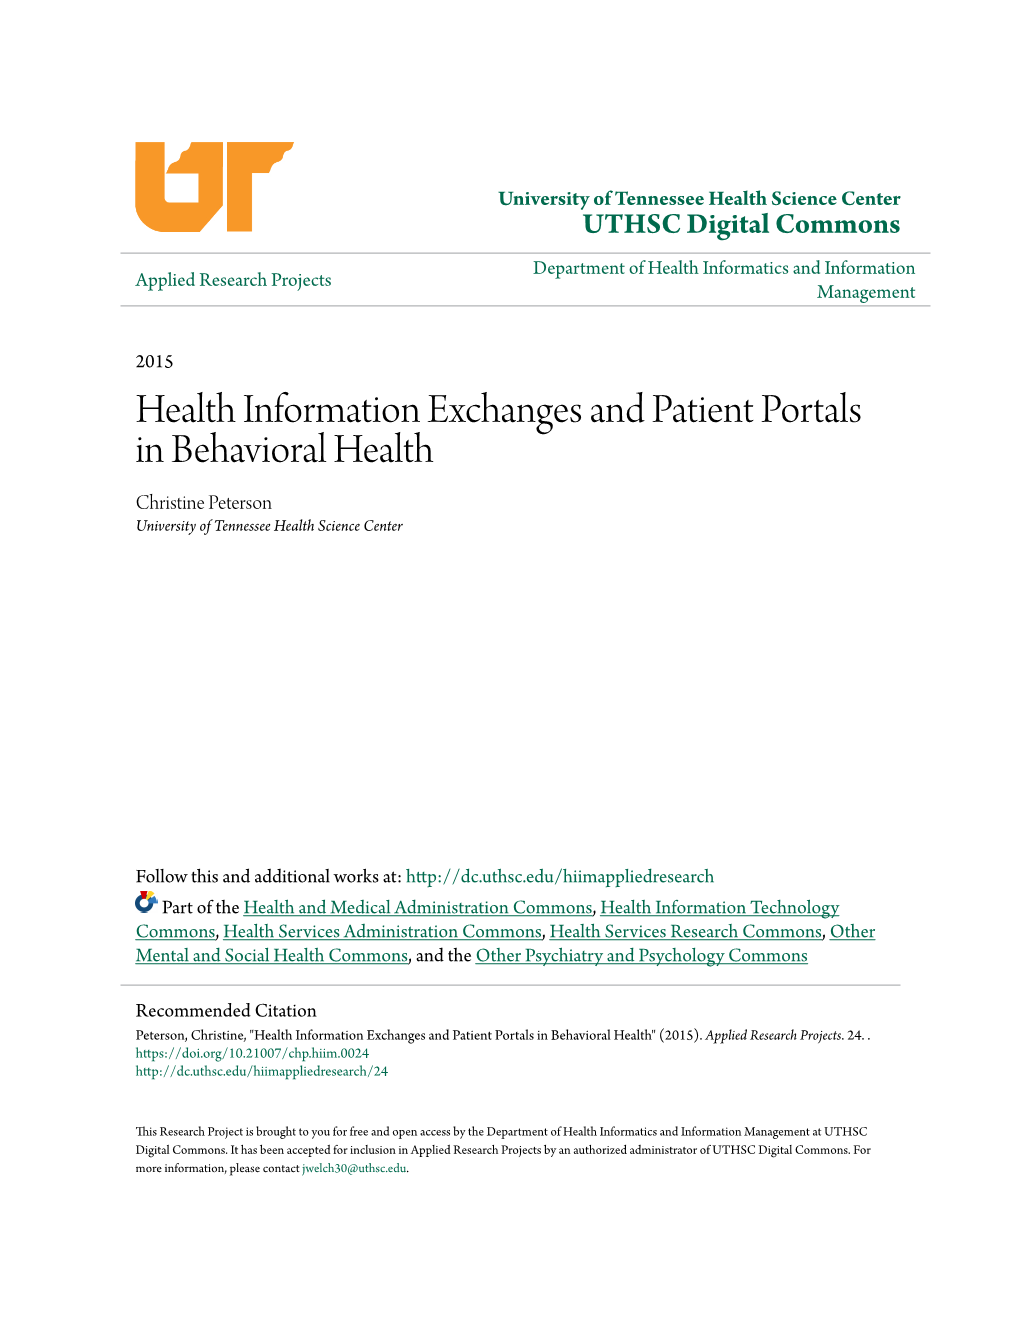 Health Information Exchanges and Patient Portals in Behavioral Health Christine Peterson University of Tennessee Health Science Center